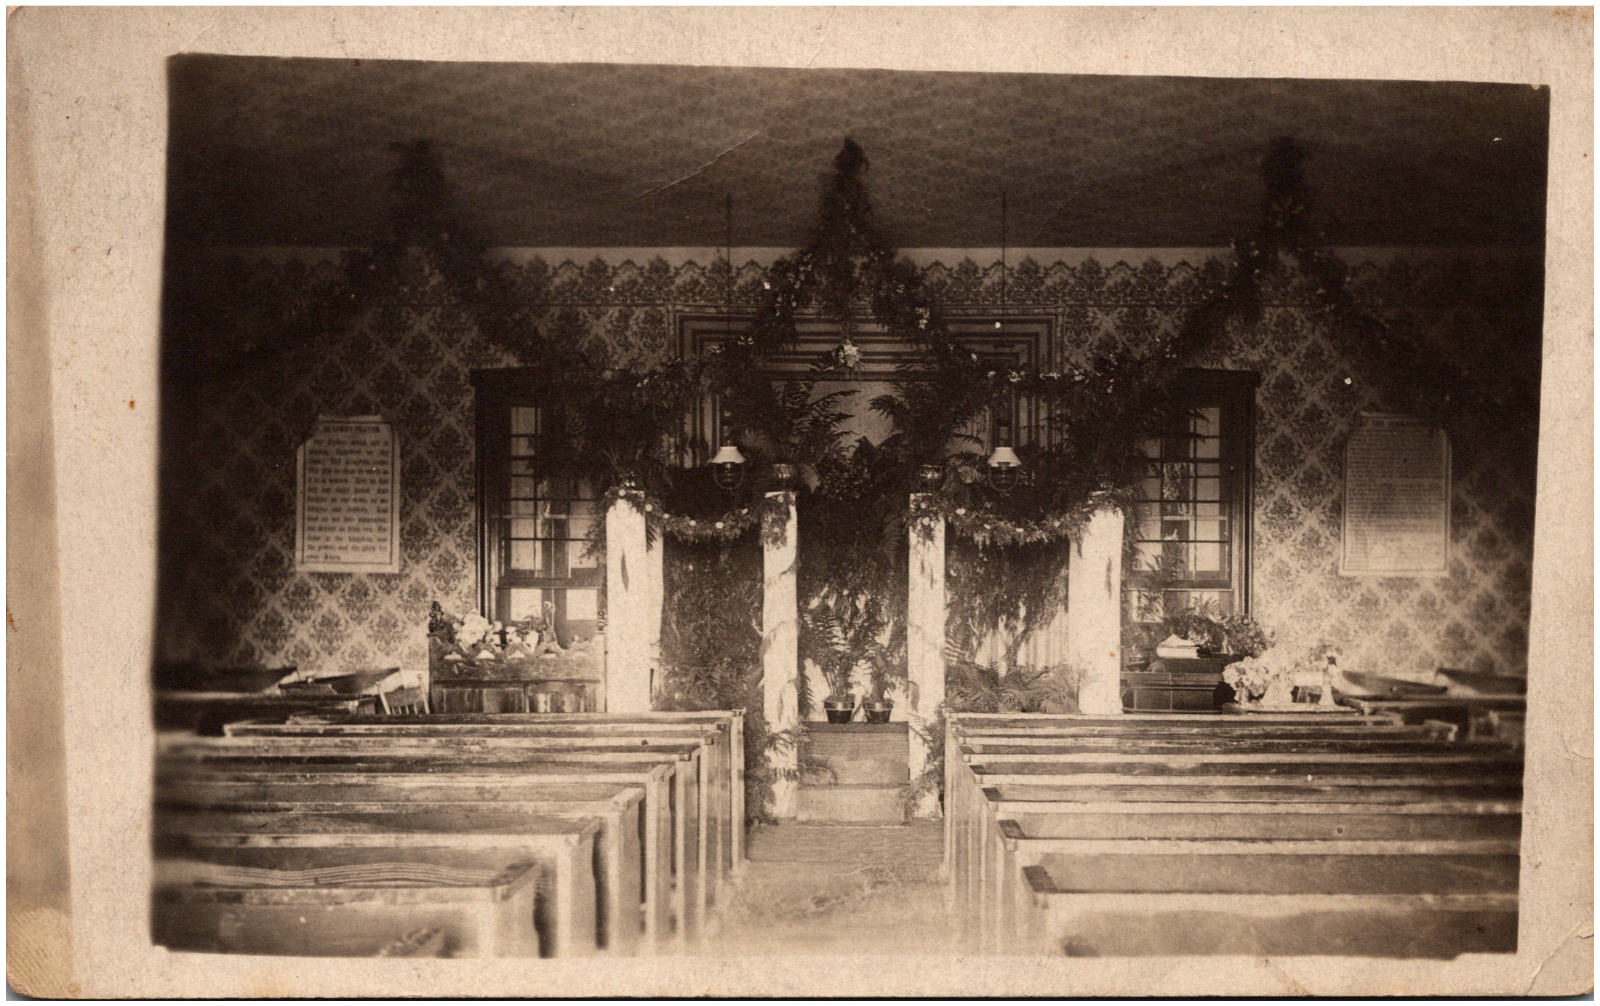 Pews & Altar of Sanctuary at Unknown Church Building 1910s RPPC Postcard Photo